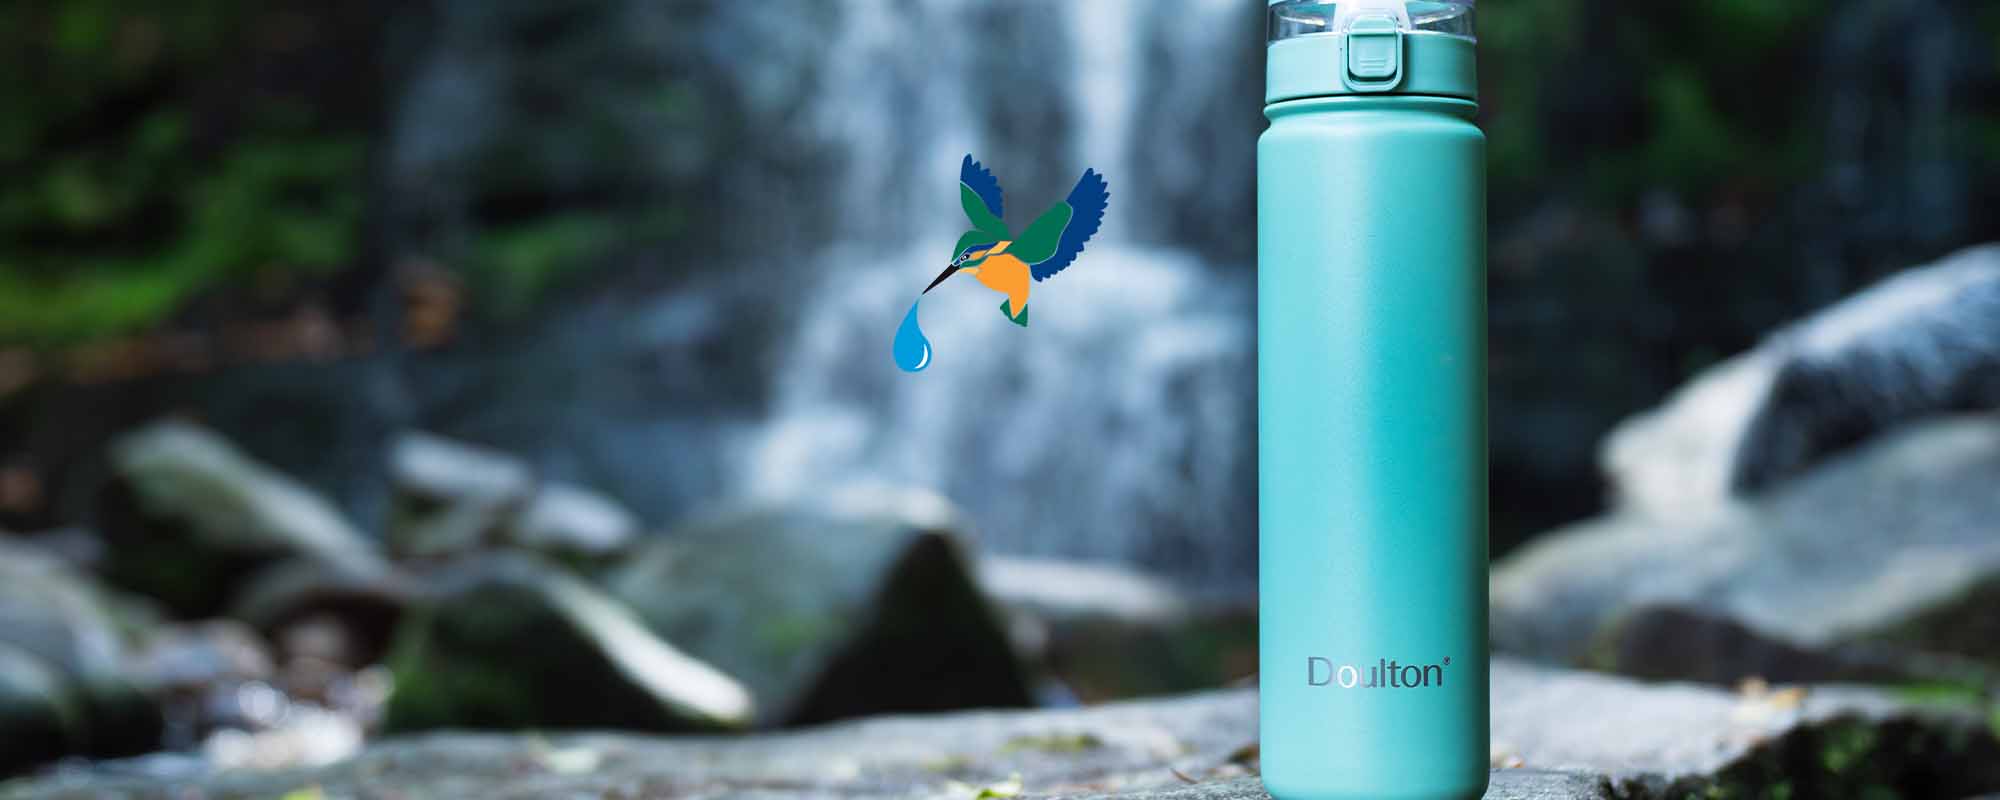 Enhance Your Hydration Experience with the Doulton Taste 2 Stainless Steel Water Bottle - Filtered Refreshment On-the-Go!